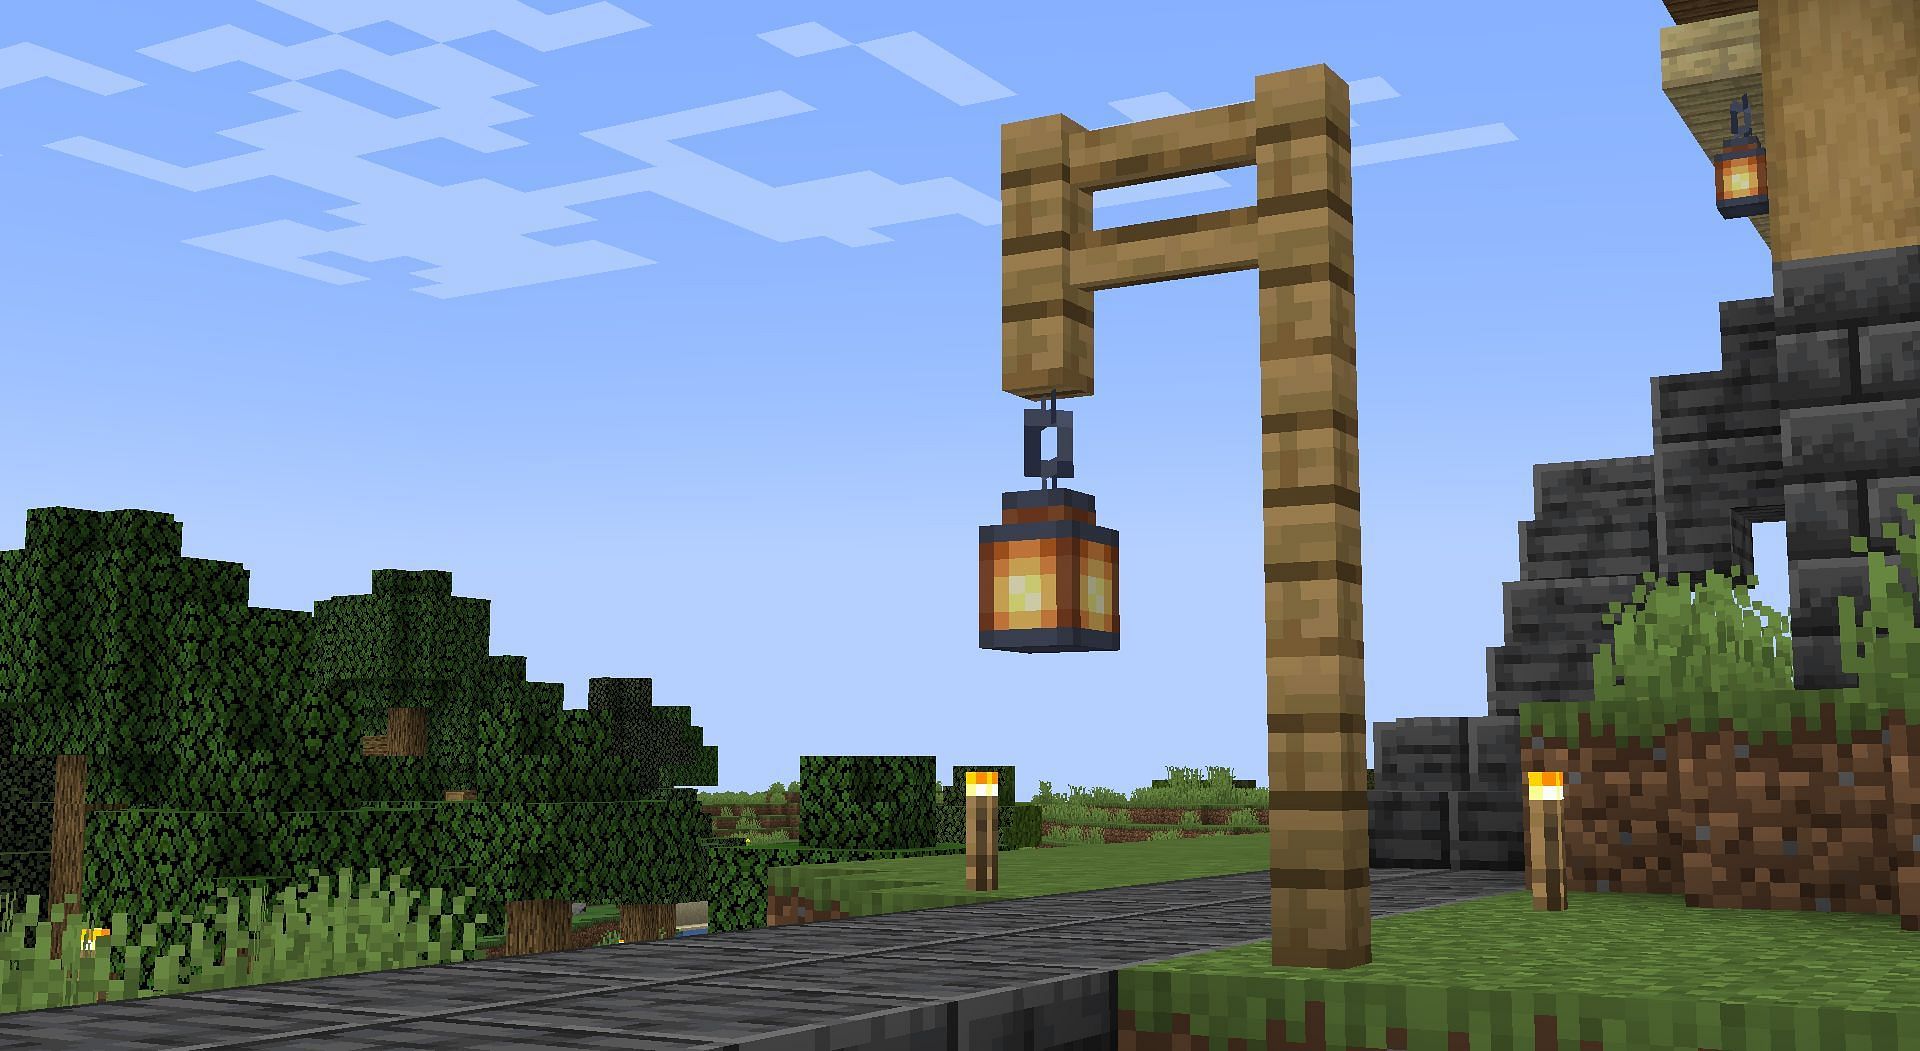 Fence used for lamp post (Image via Minecraft)